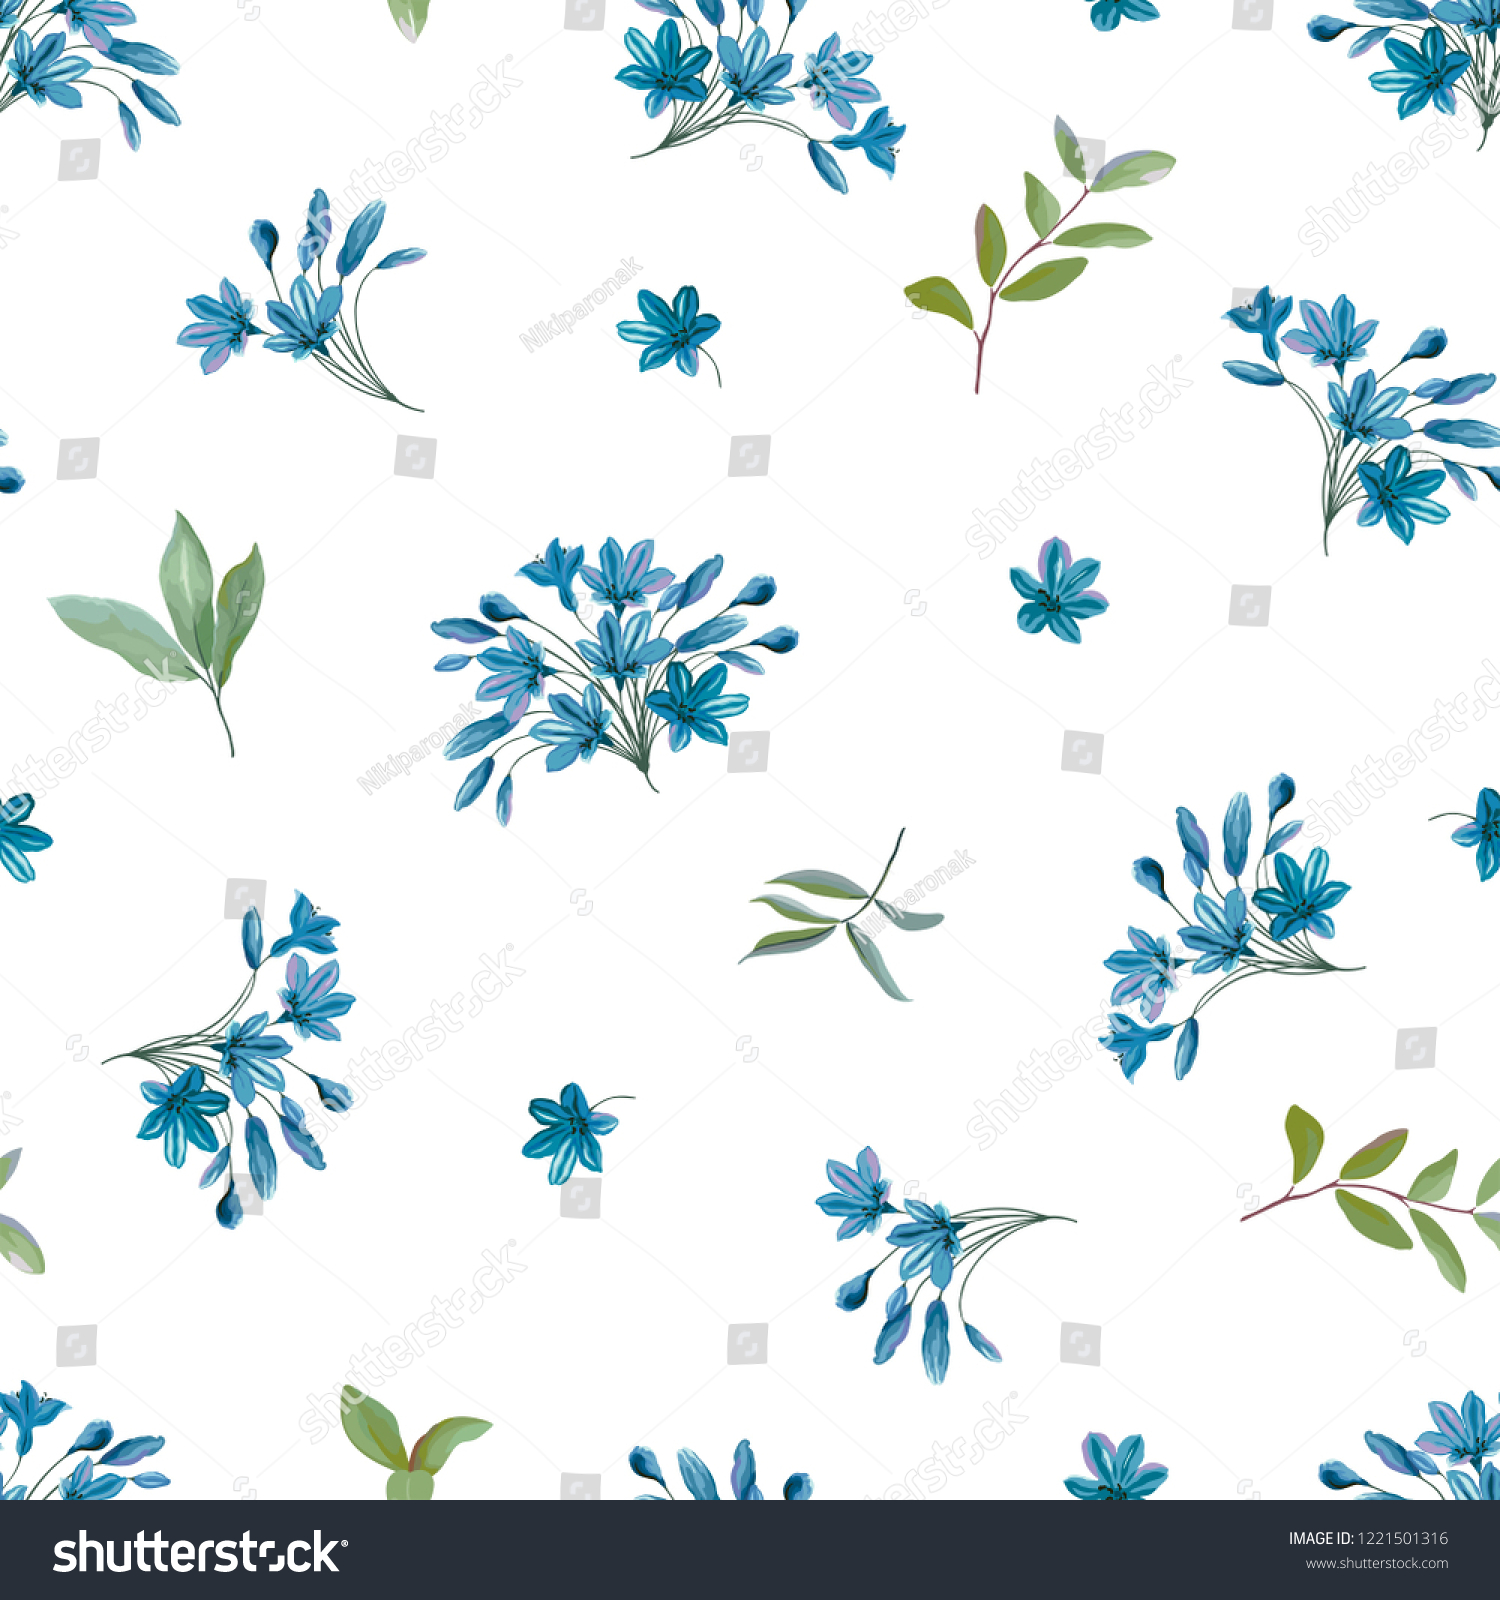 SVG of Seamless pattern with flowers blue Agapanthus, green leaves and branches. Floral design on white background. Vector illustration in vintage rustic style. svg